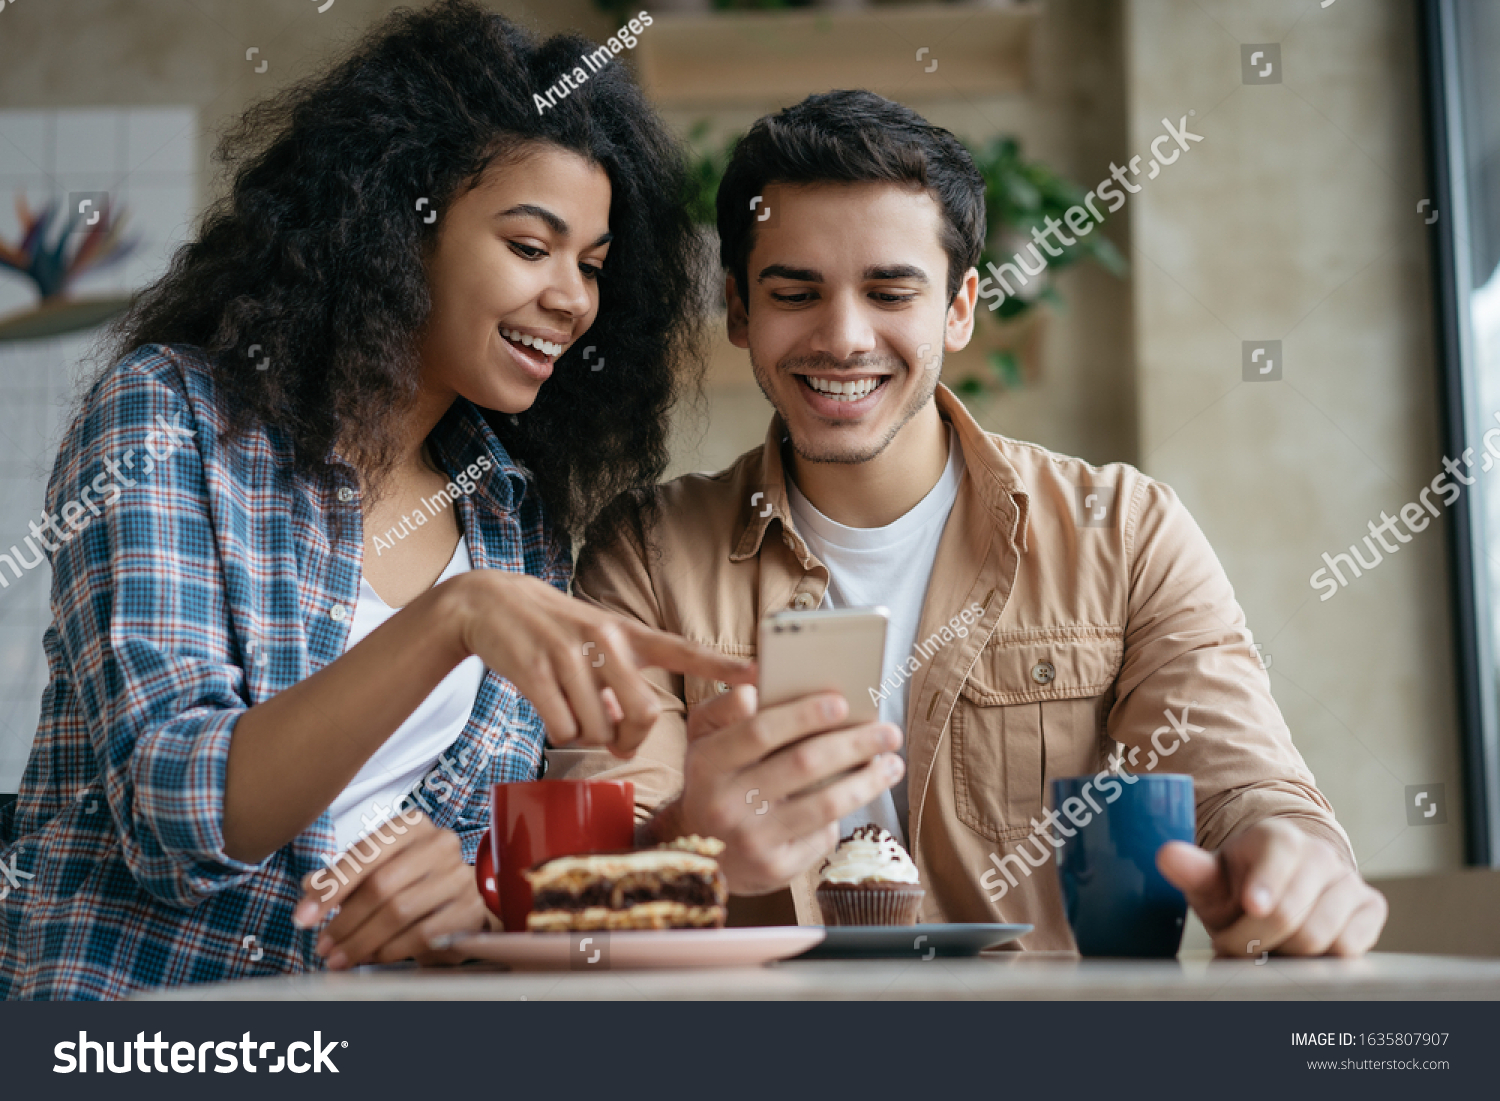 Happy couple using mobile phone application for online shopping. Emotional friends communication, laughing, looking at digital screen, sitting together in cafe  #1635807907